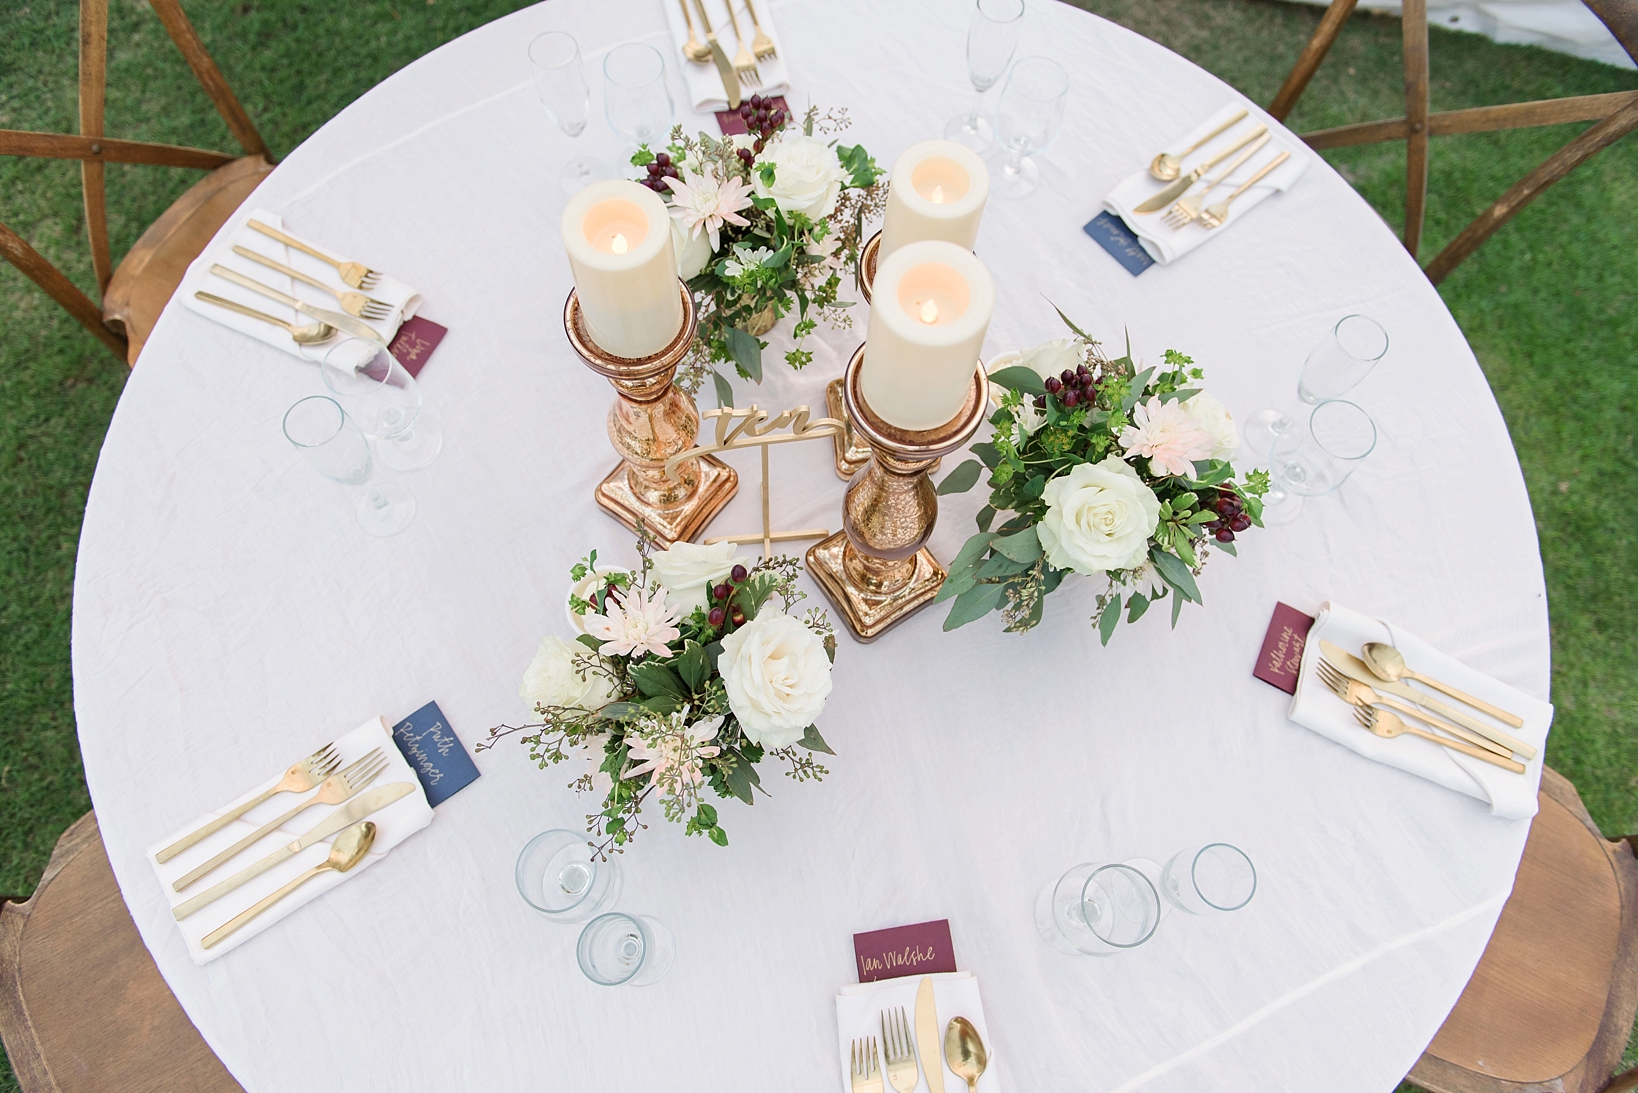 Simple gold candelabras and floral centerpieces decorated the tables with gold utensil accents